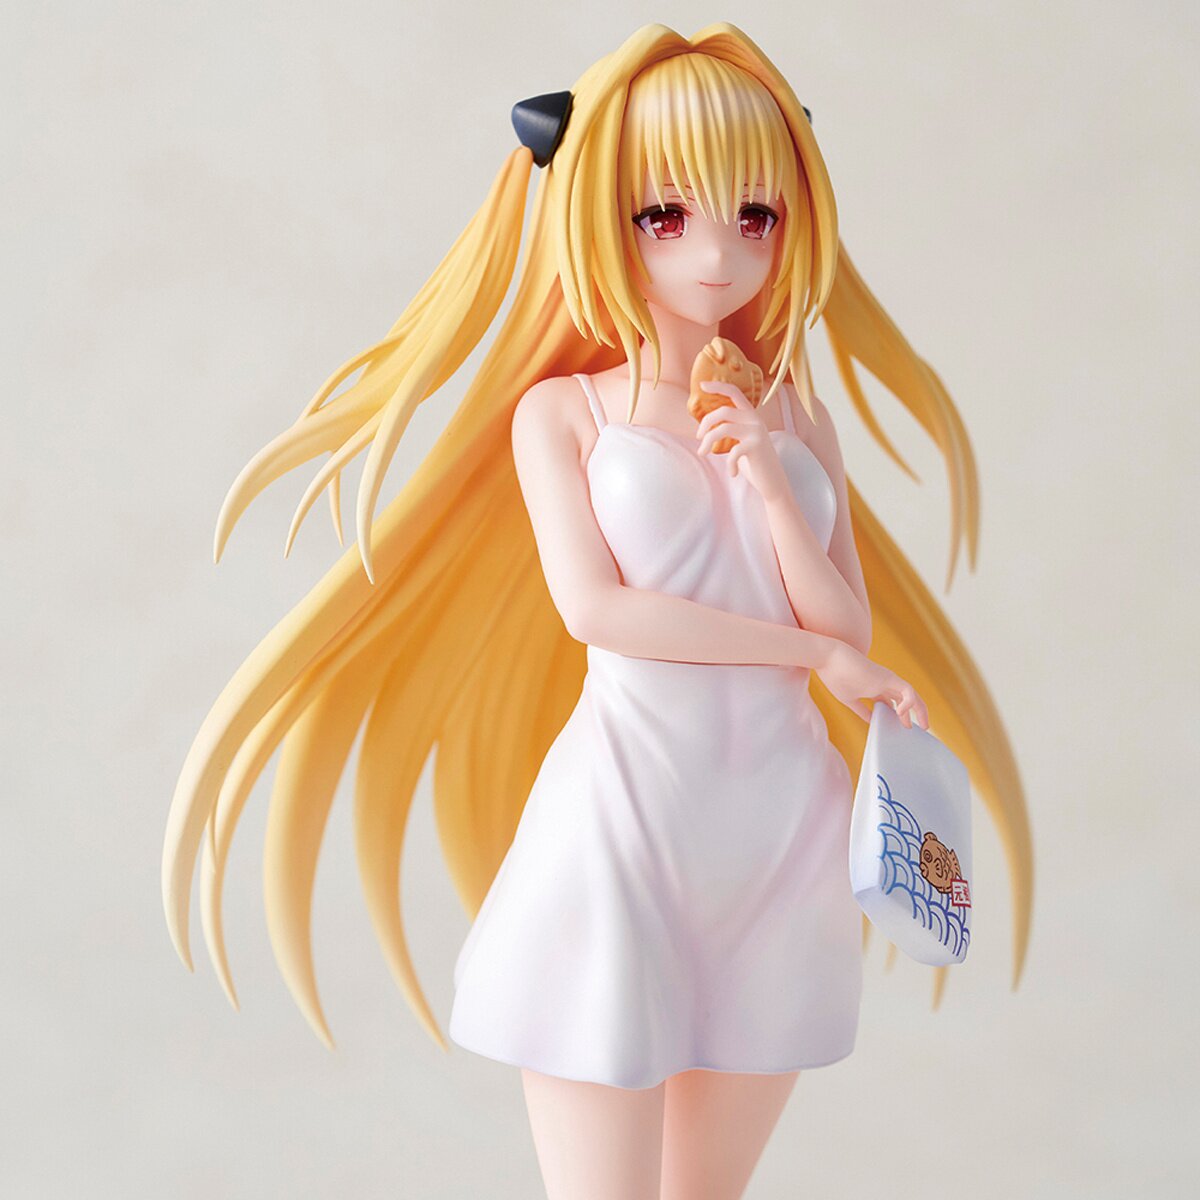 To Love Ru Celebrates 15th Manga Anniversary With Special Exhibition